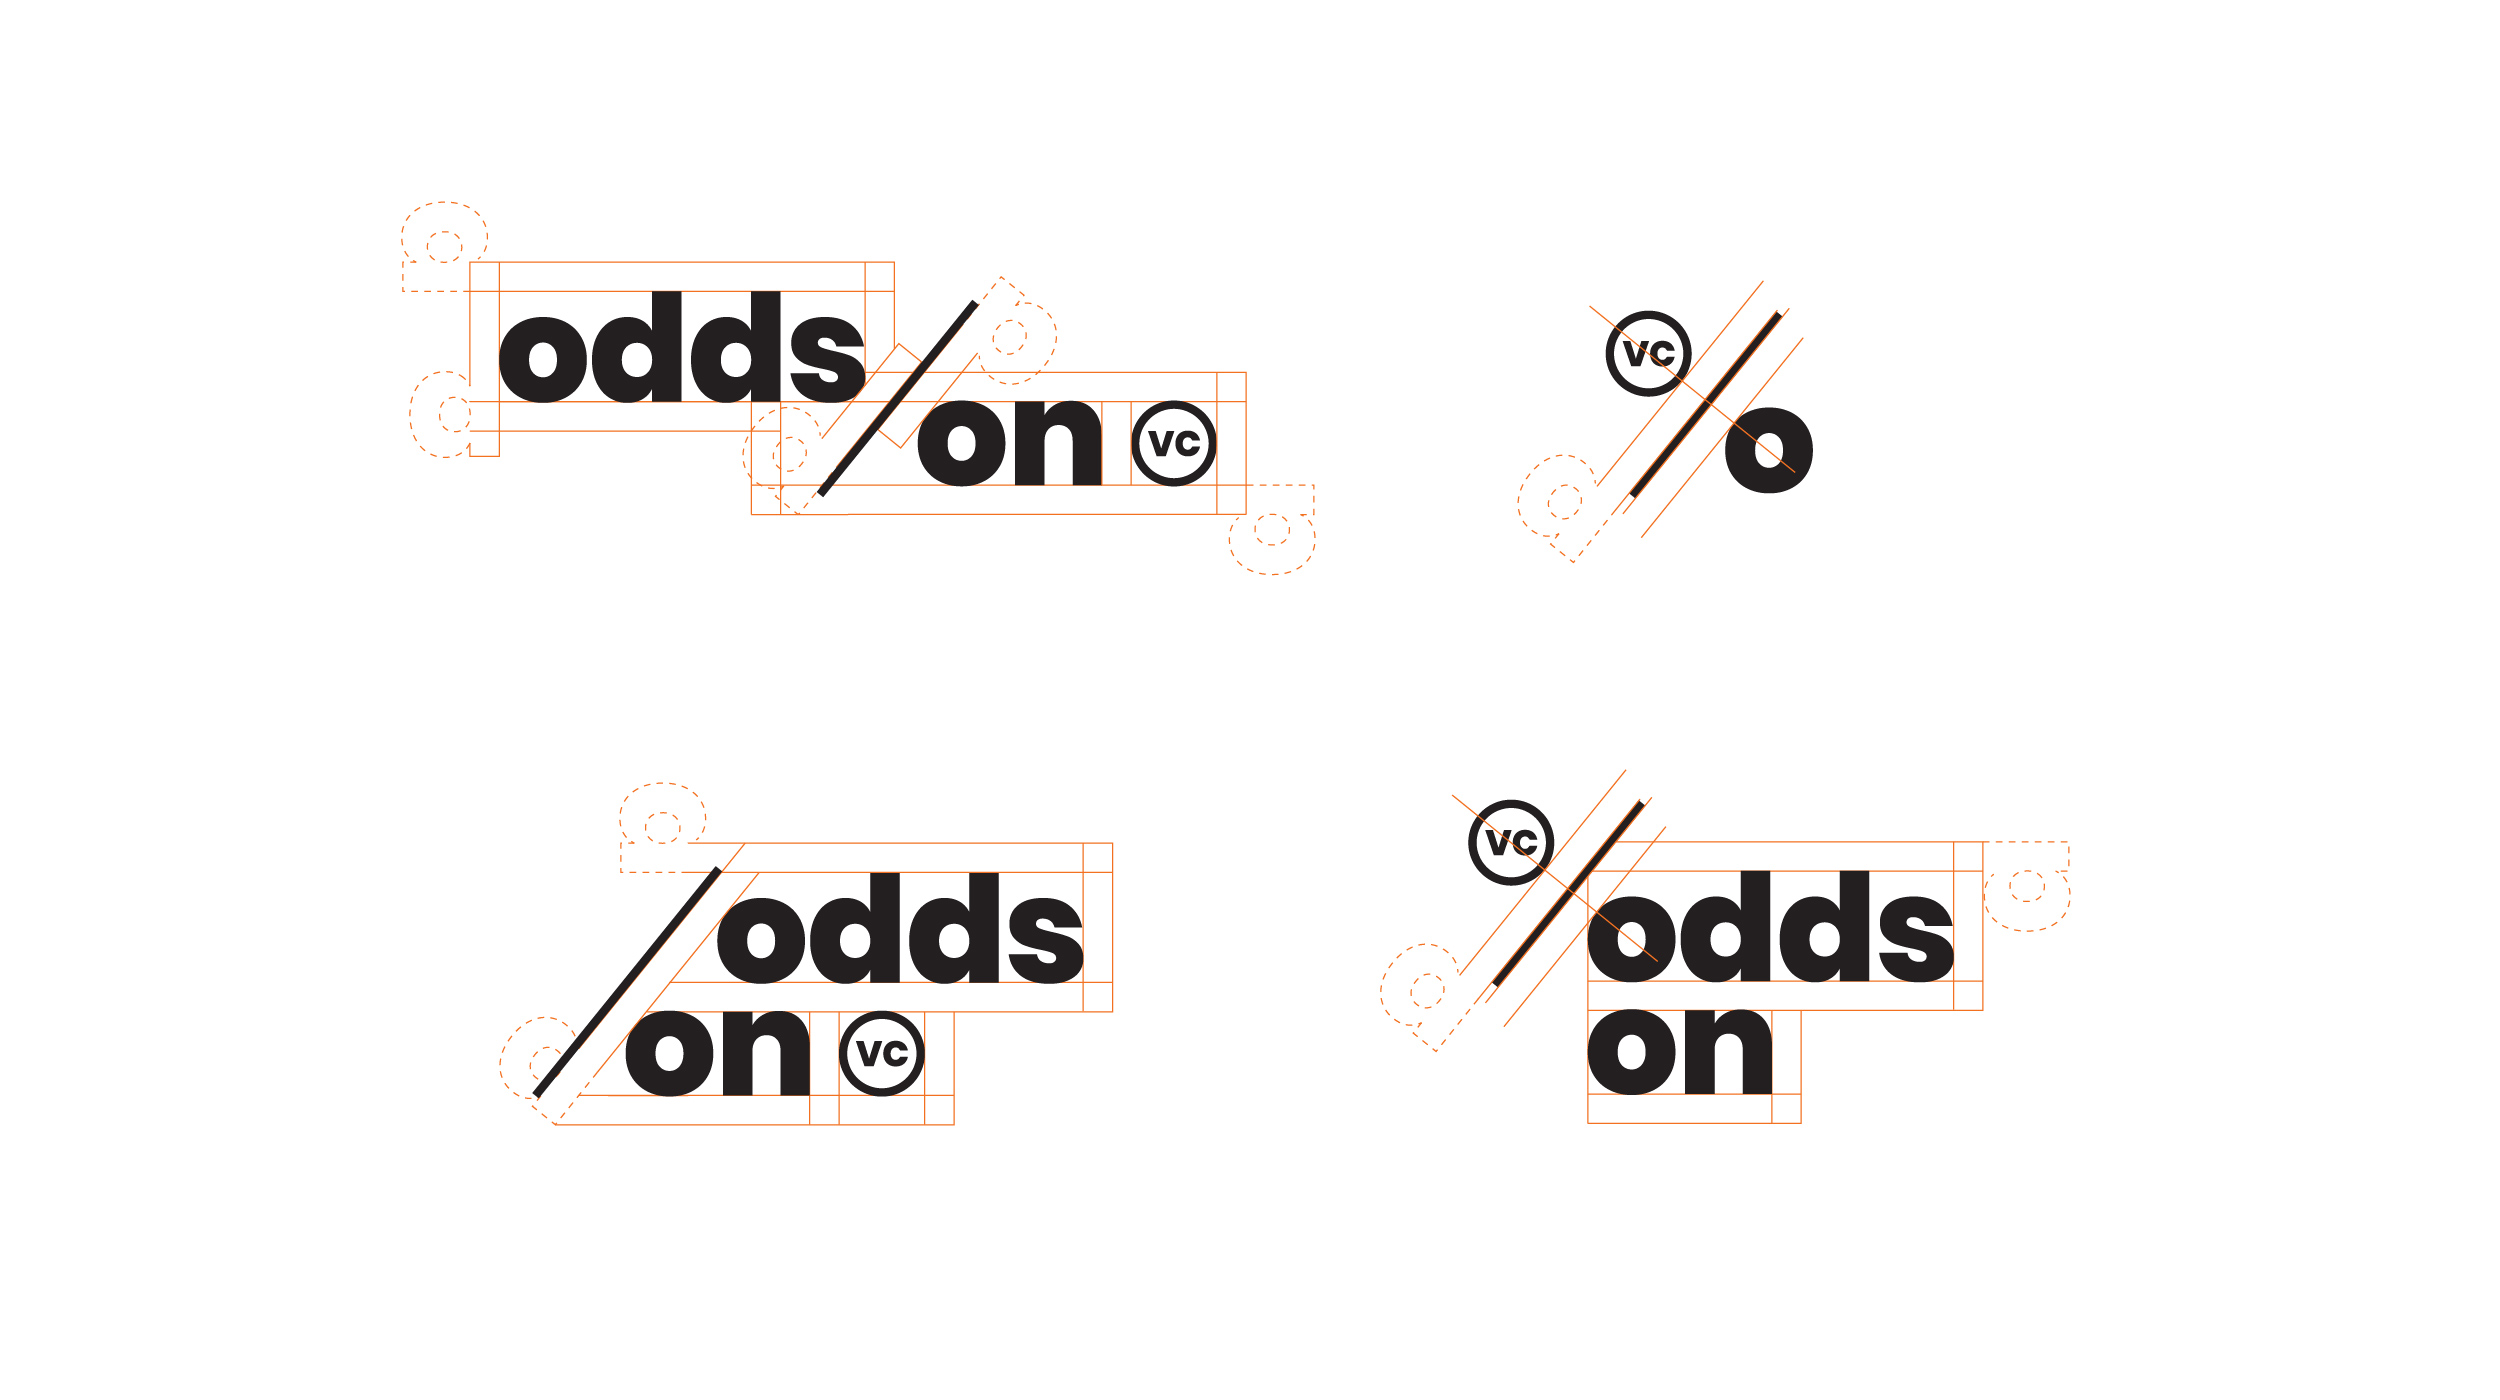 Odds On Logo grid and spacing